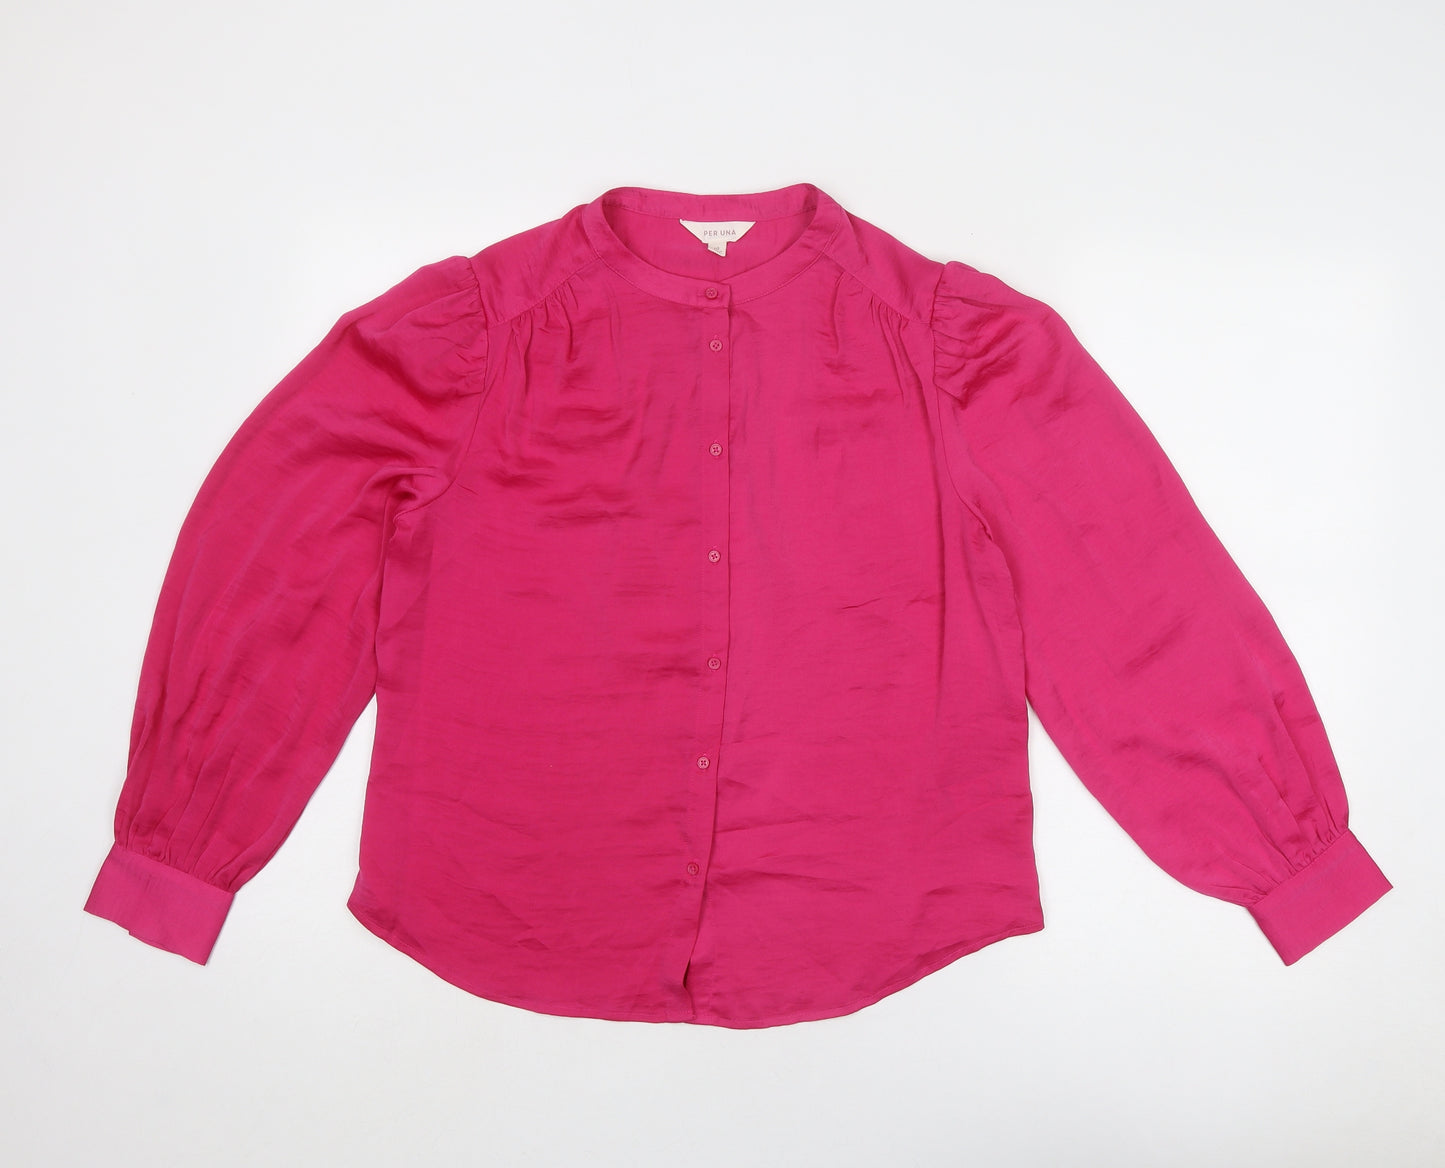 Per Una Womens Pink Polyester Basic Button-Up Size 10 Round Neck